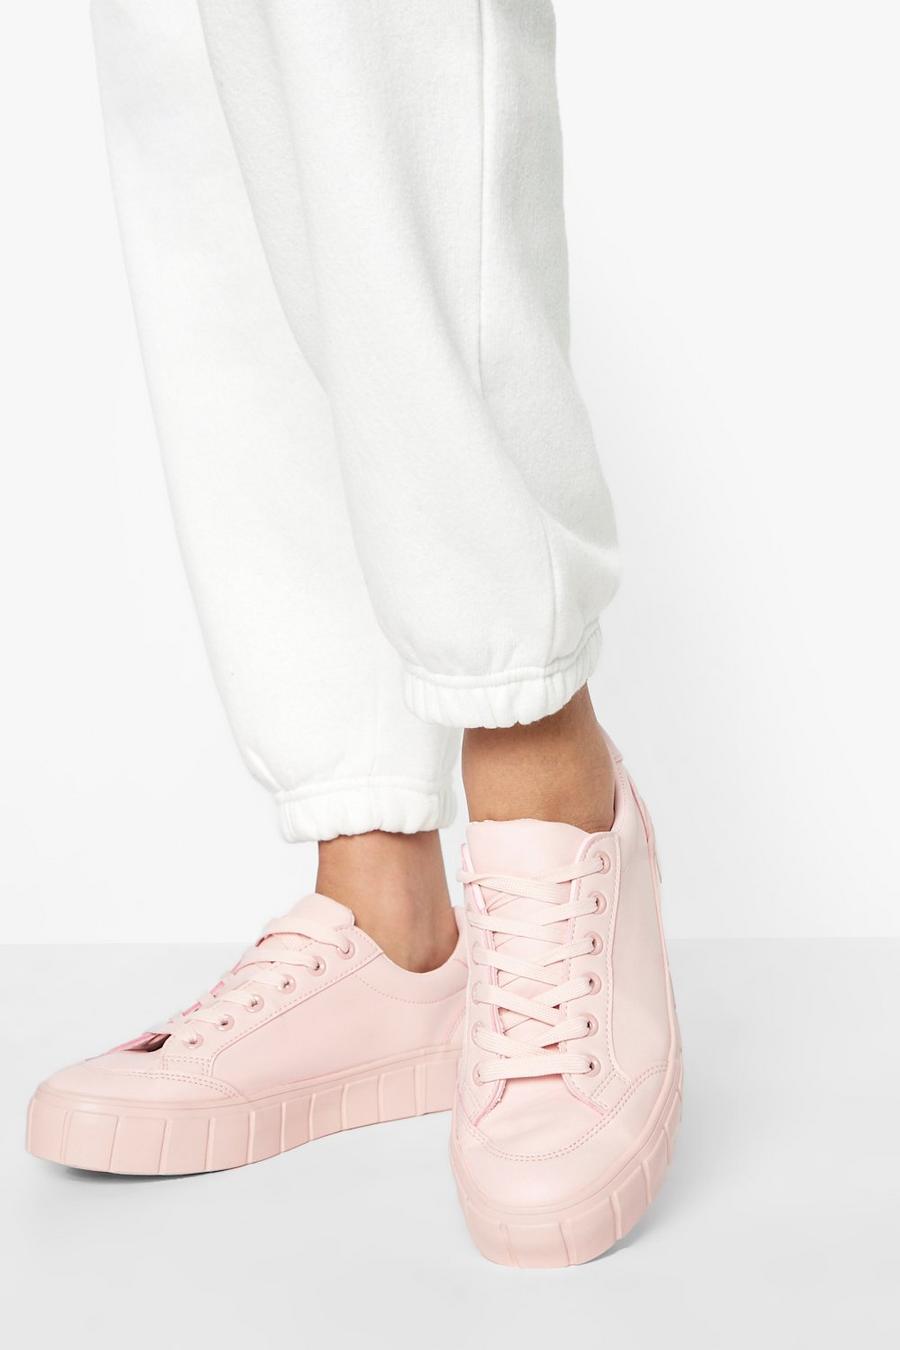 Pink Pairs of shoes